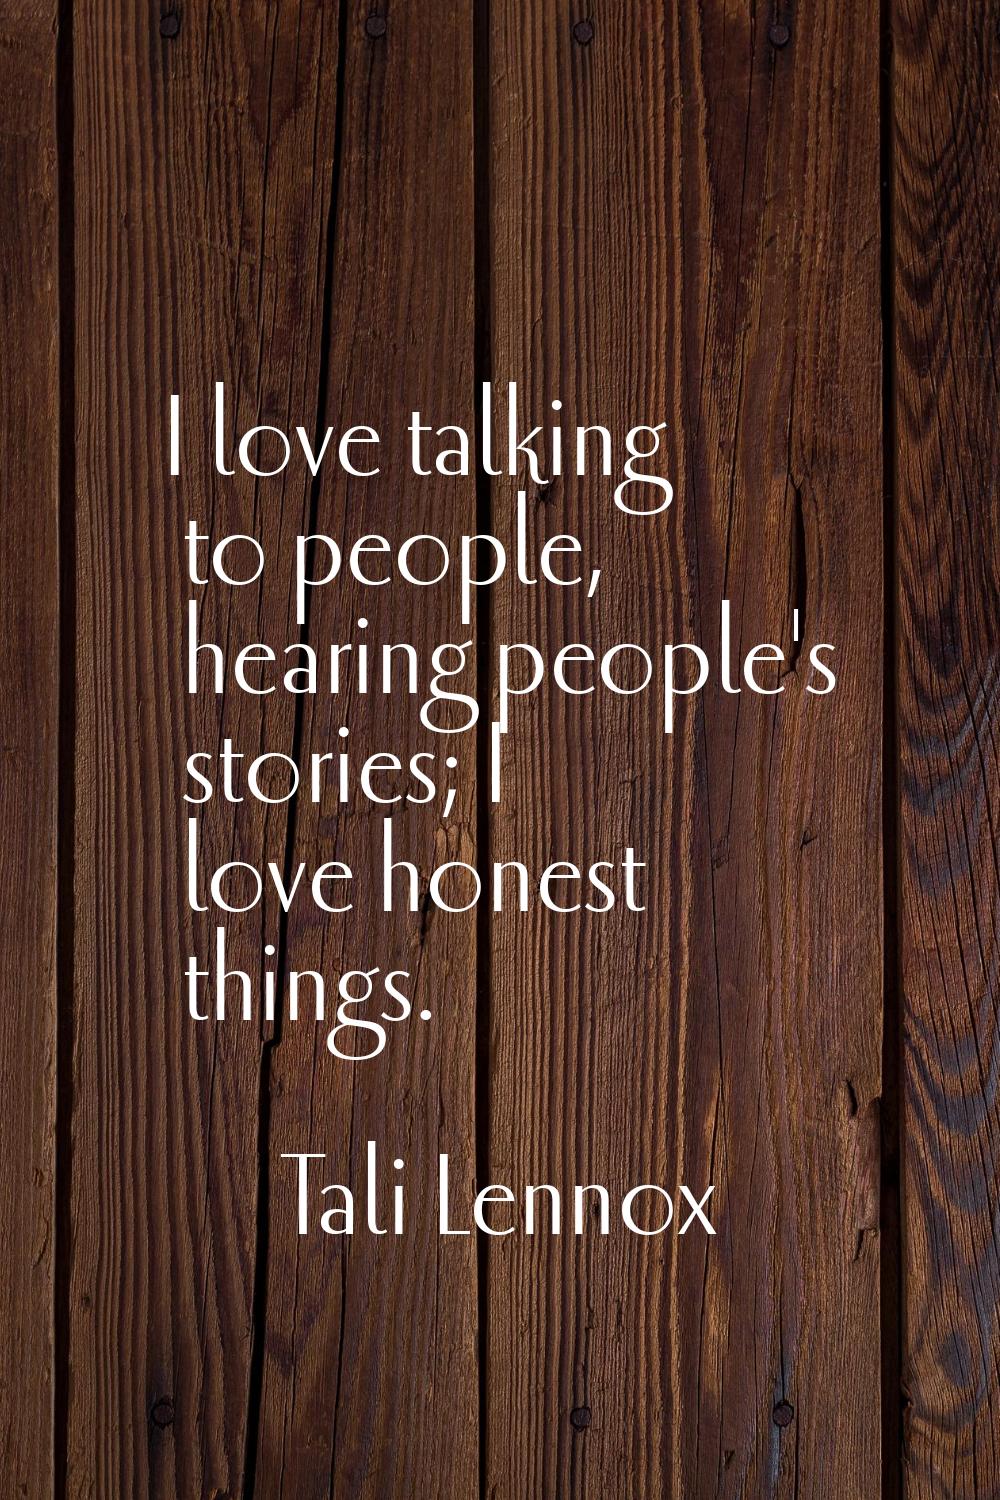 I love talking to people, hearing people's stories; I love honest things.